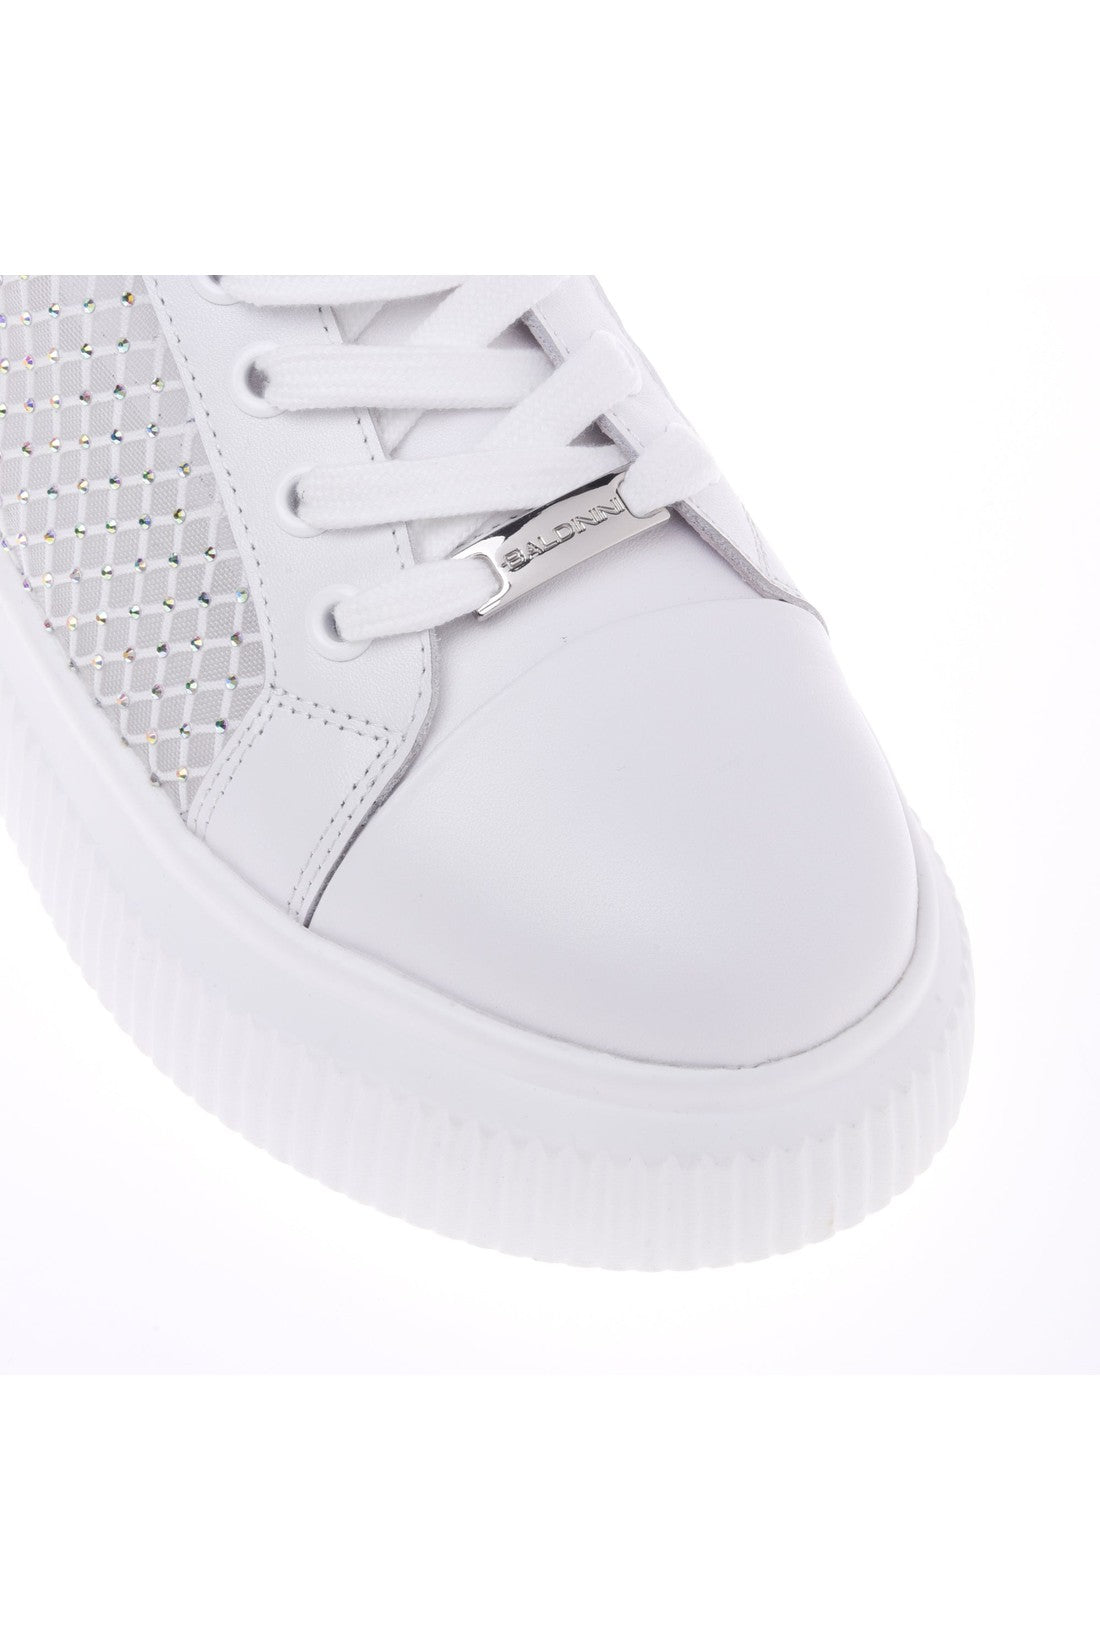 BALDININI-OUTLET-SALE-Sneaker-in-white-calfskin-with-mesh-Sneaker-ARCHIVE-COLLECTION-4.jpg